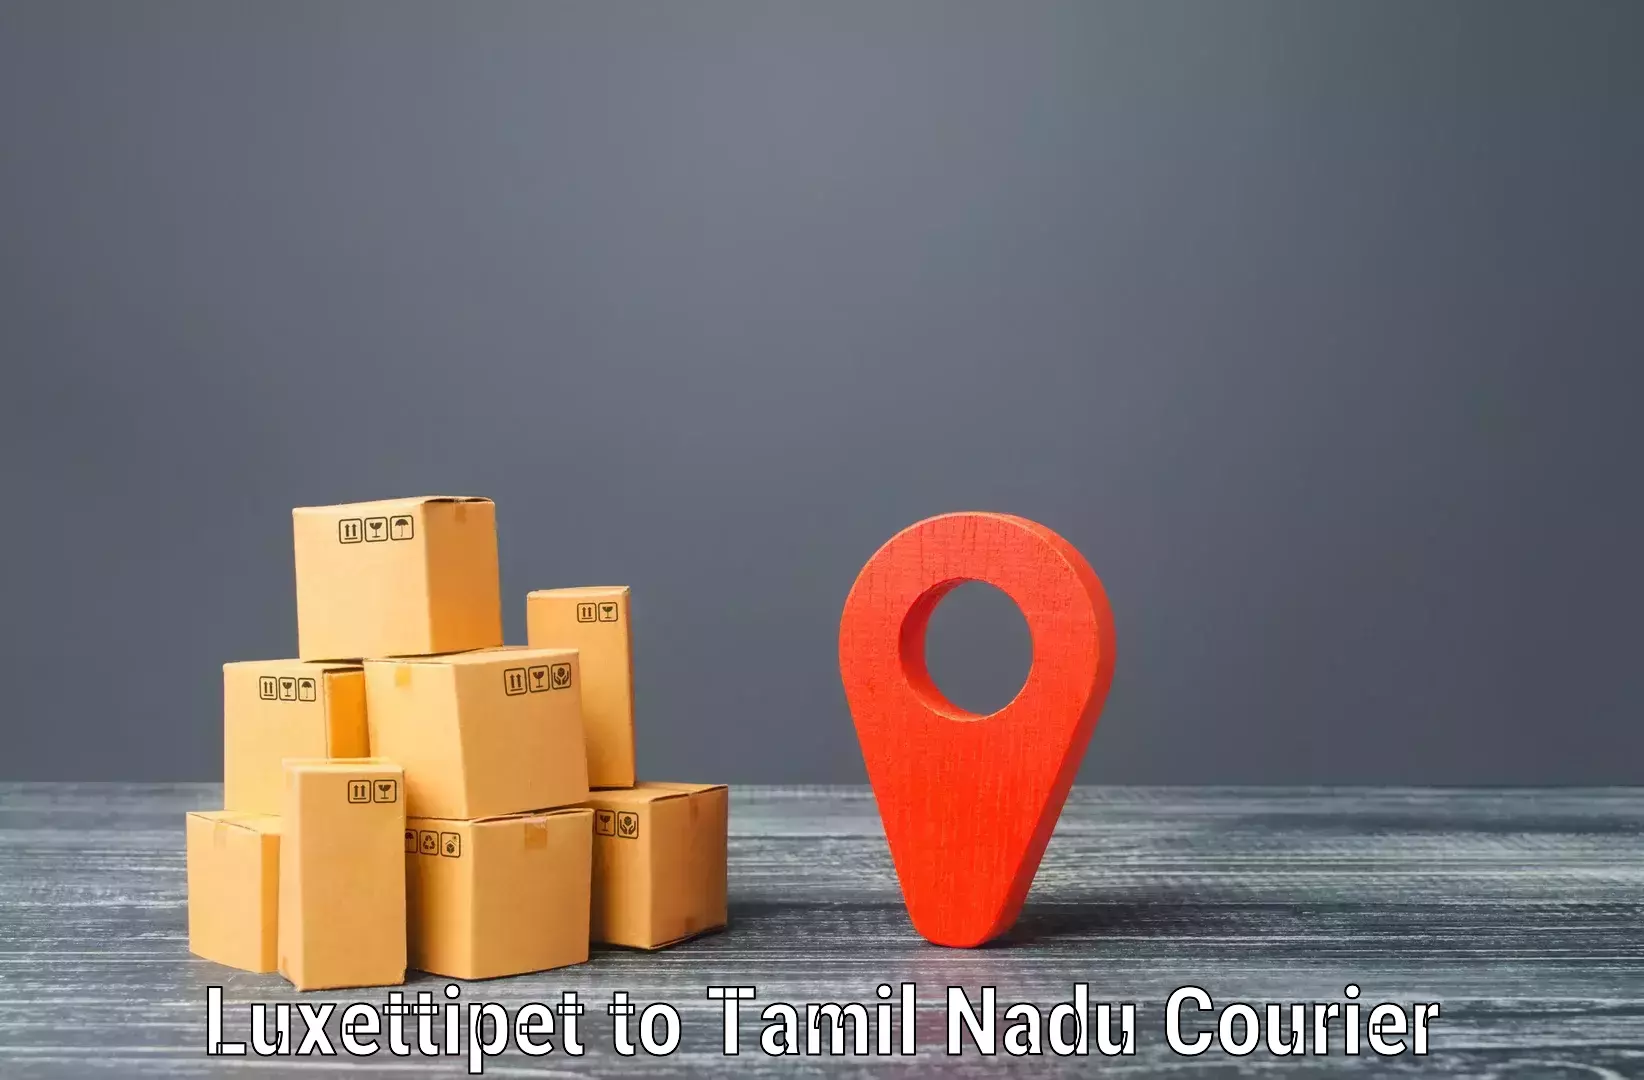 Optimized shipping routes in Luxettipet to Kanchipuram